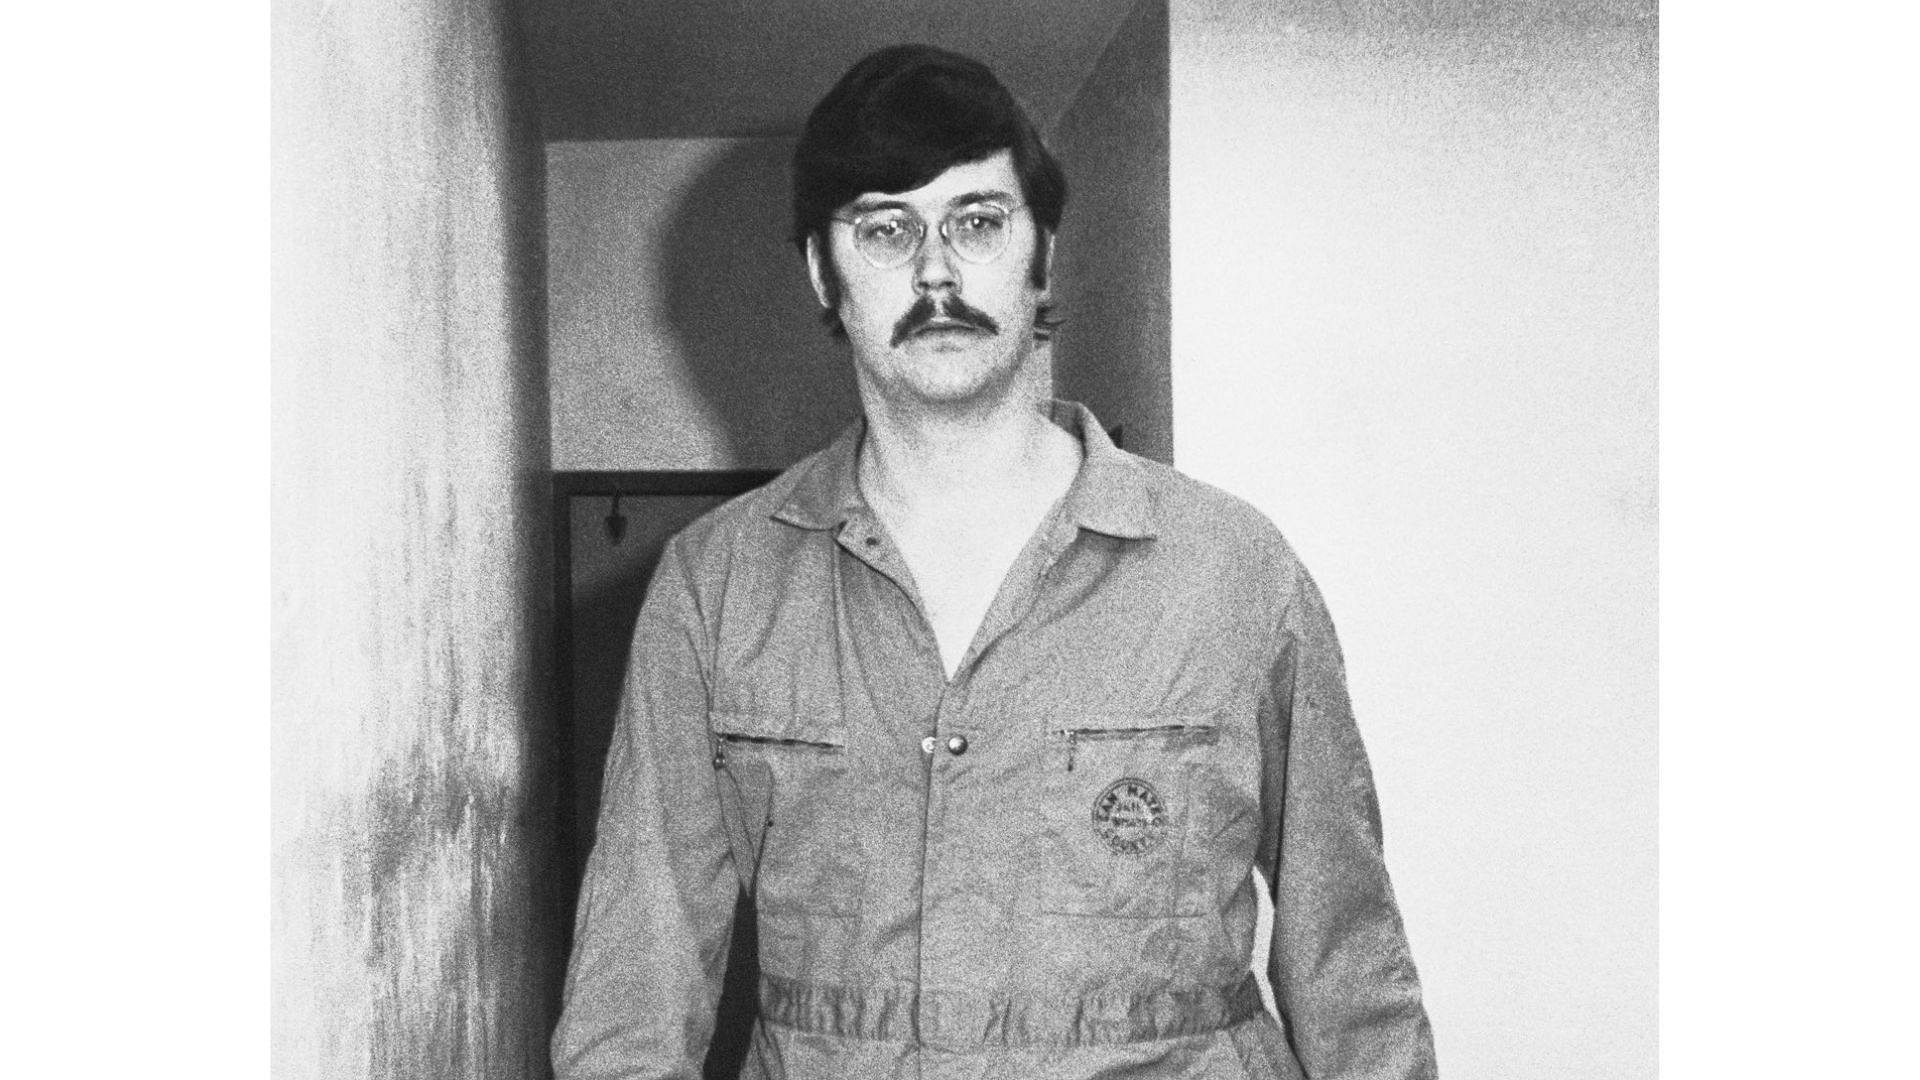 Ed Kemper was sentenced to life in prison for his crimes (Image via @Dubsln4/Twitter)